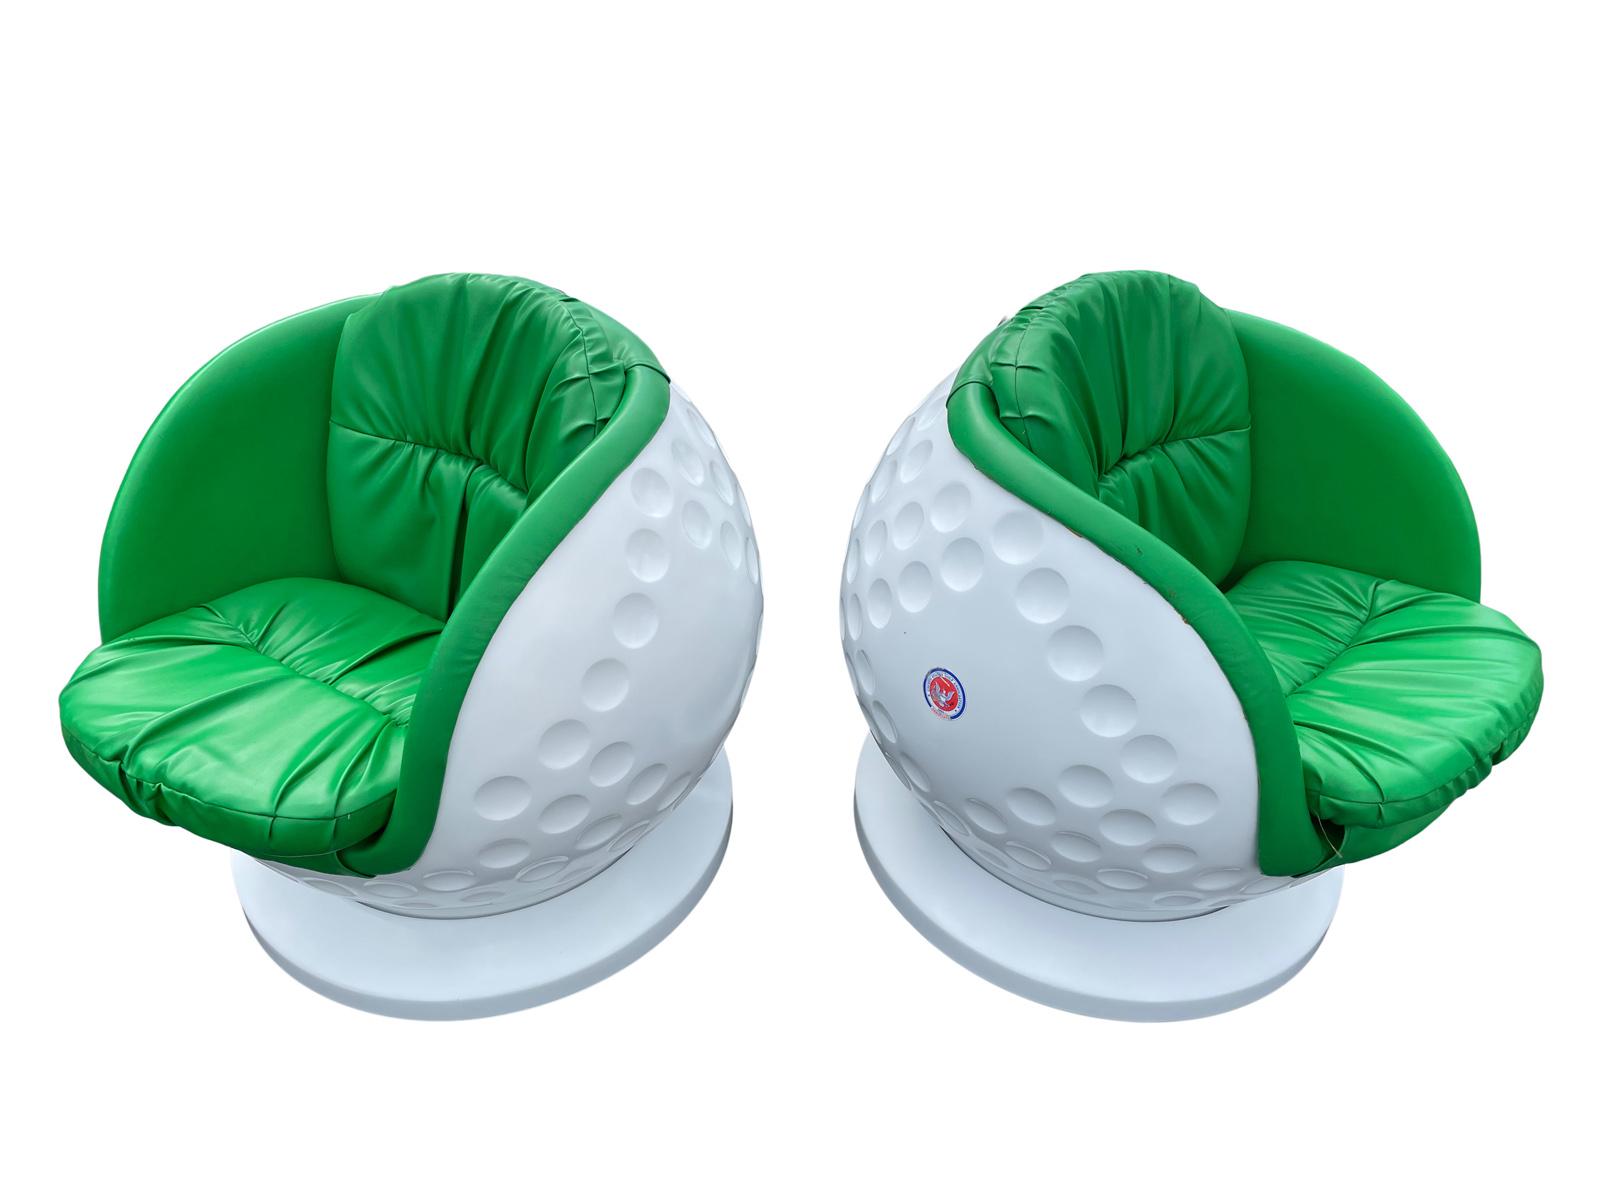 Very unique pair of fiberglass Molded lounge chairs in the shape of golf balls. These were acquired from a PGA tour in the 1970s I believe in Oklahoma.